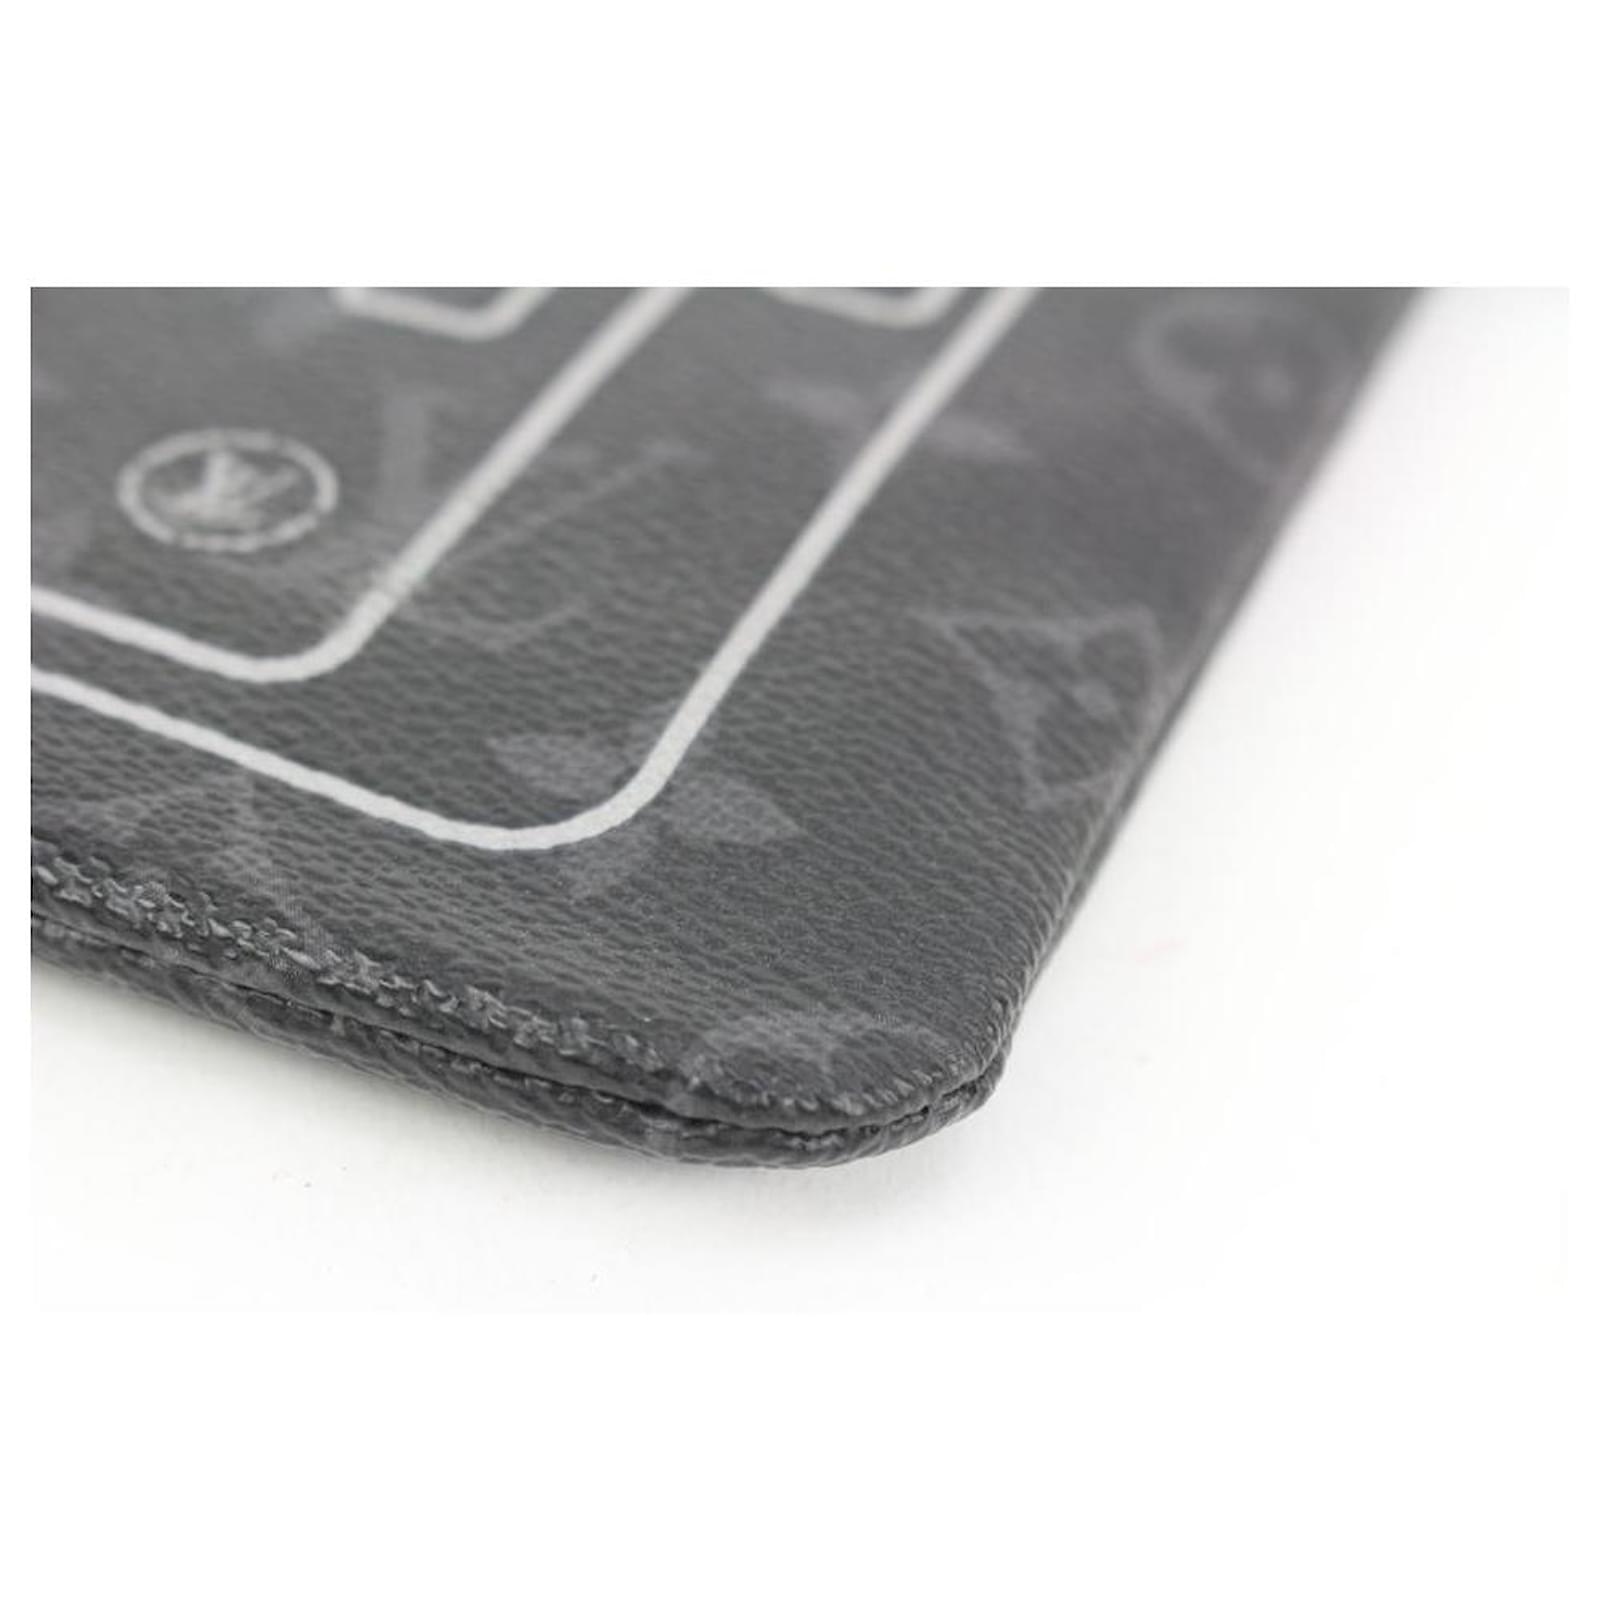 A LIMITED EDITION BLACK MONOGRAM ECLIPSE FLASH IPAD POUCH WITH